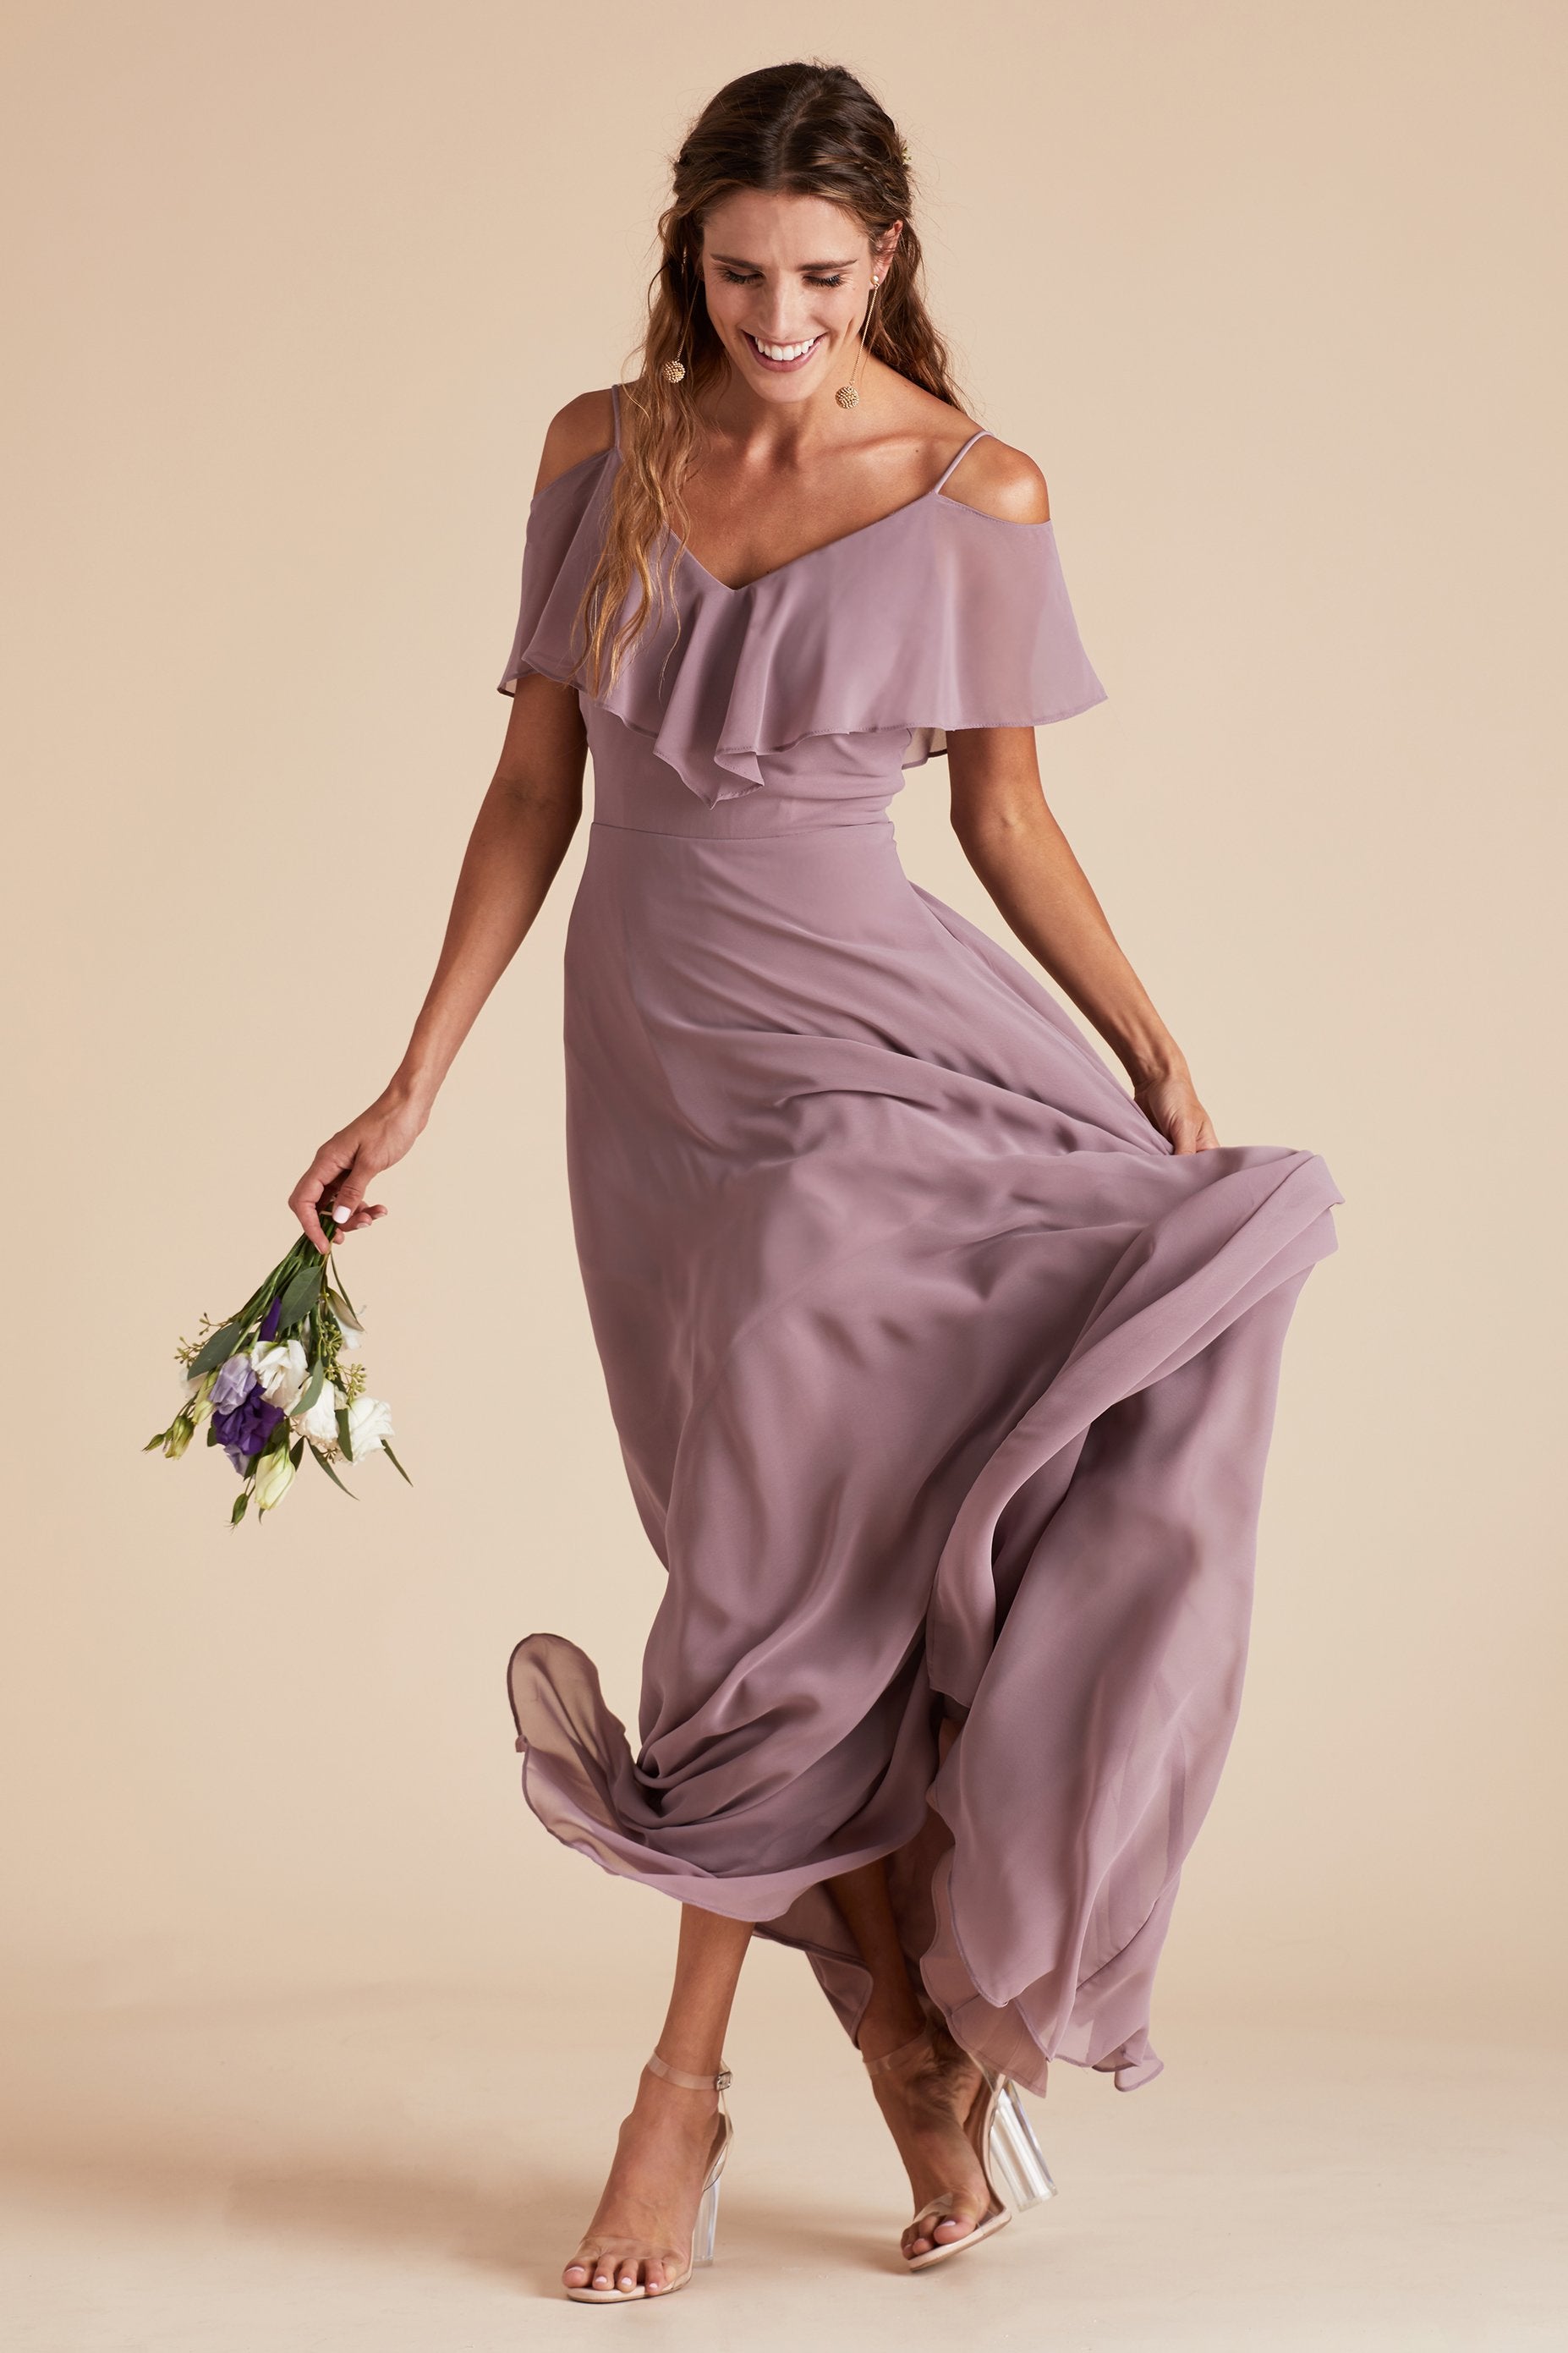 Jane convertible bridesmaid dress in dark mauve chiffon by Birdy Grey, front view